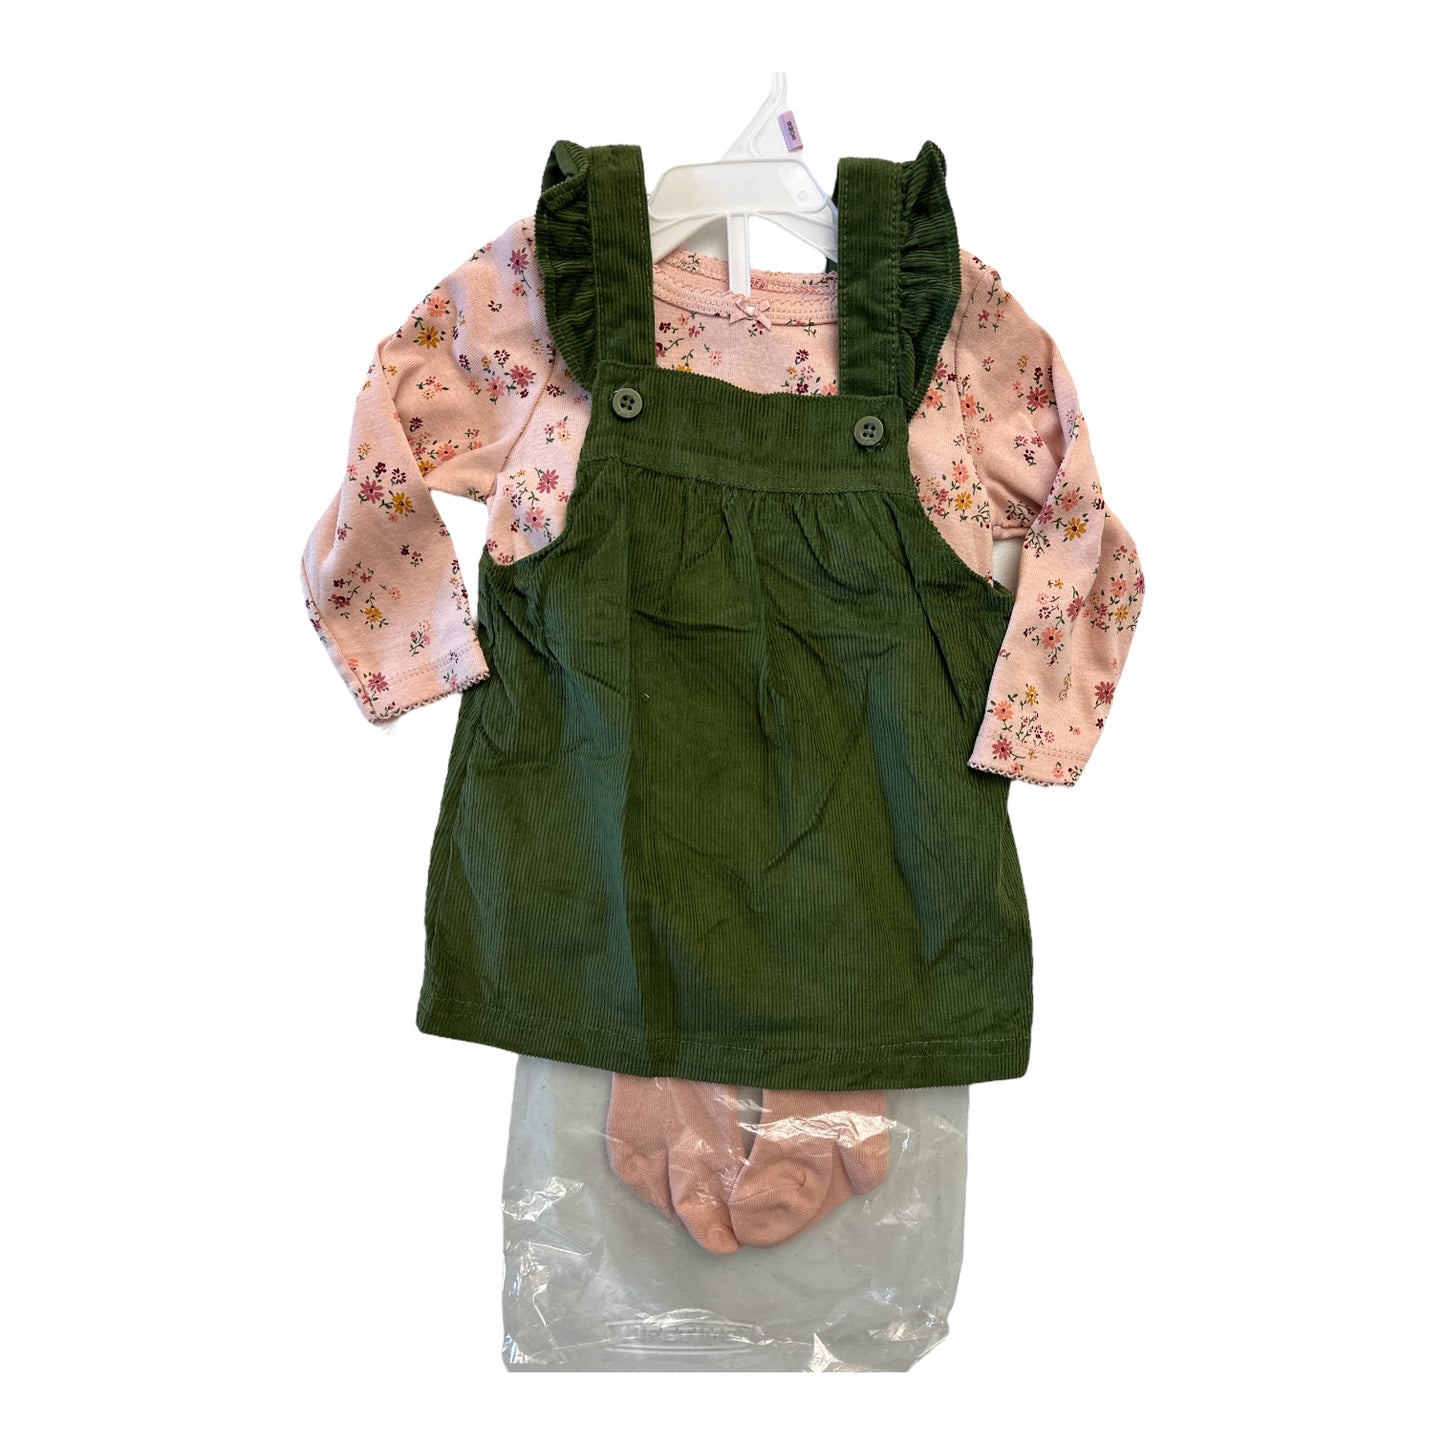 Carter's Baby Girl's 3 Piece Long Sleeve Top, Overall Dress & Tights Set